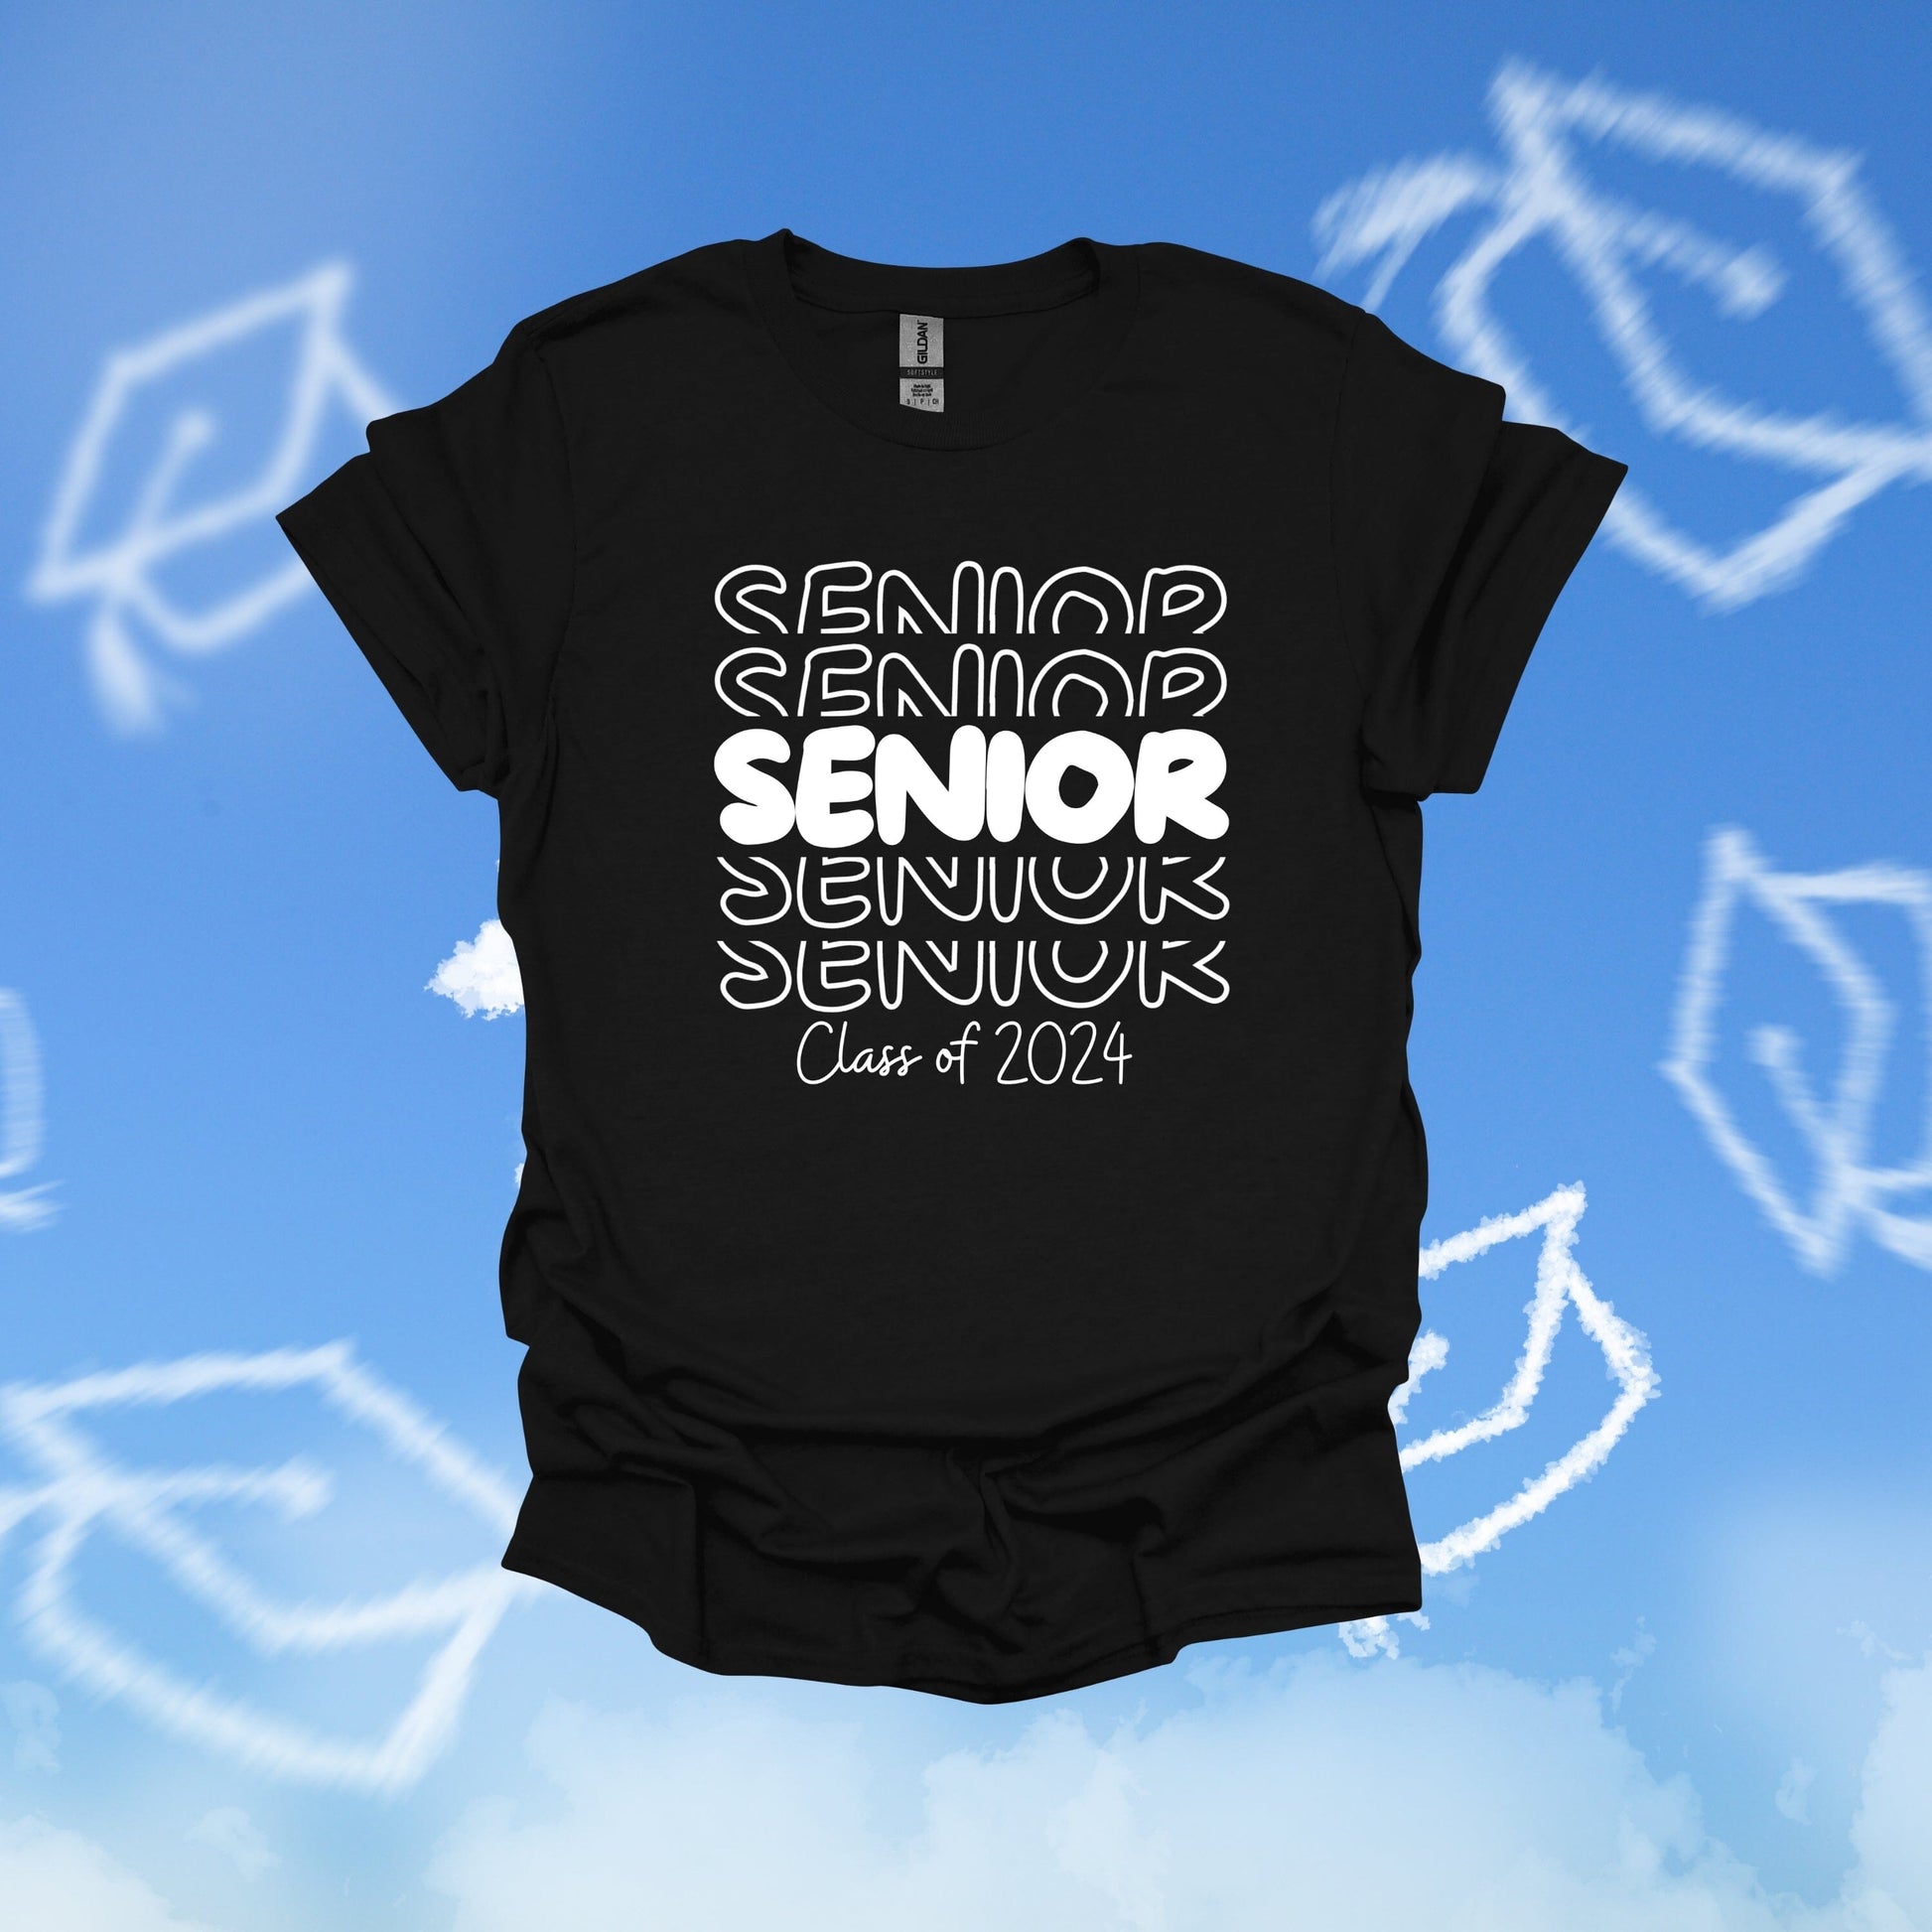 Class of 2024 - Senior - Graduation - Custom Colors Available - Adult Tee Shirts T-Shirts Graphic Avenue Black Adult Small 